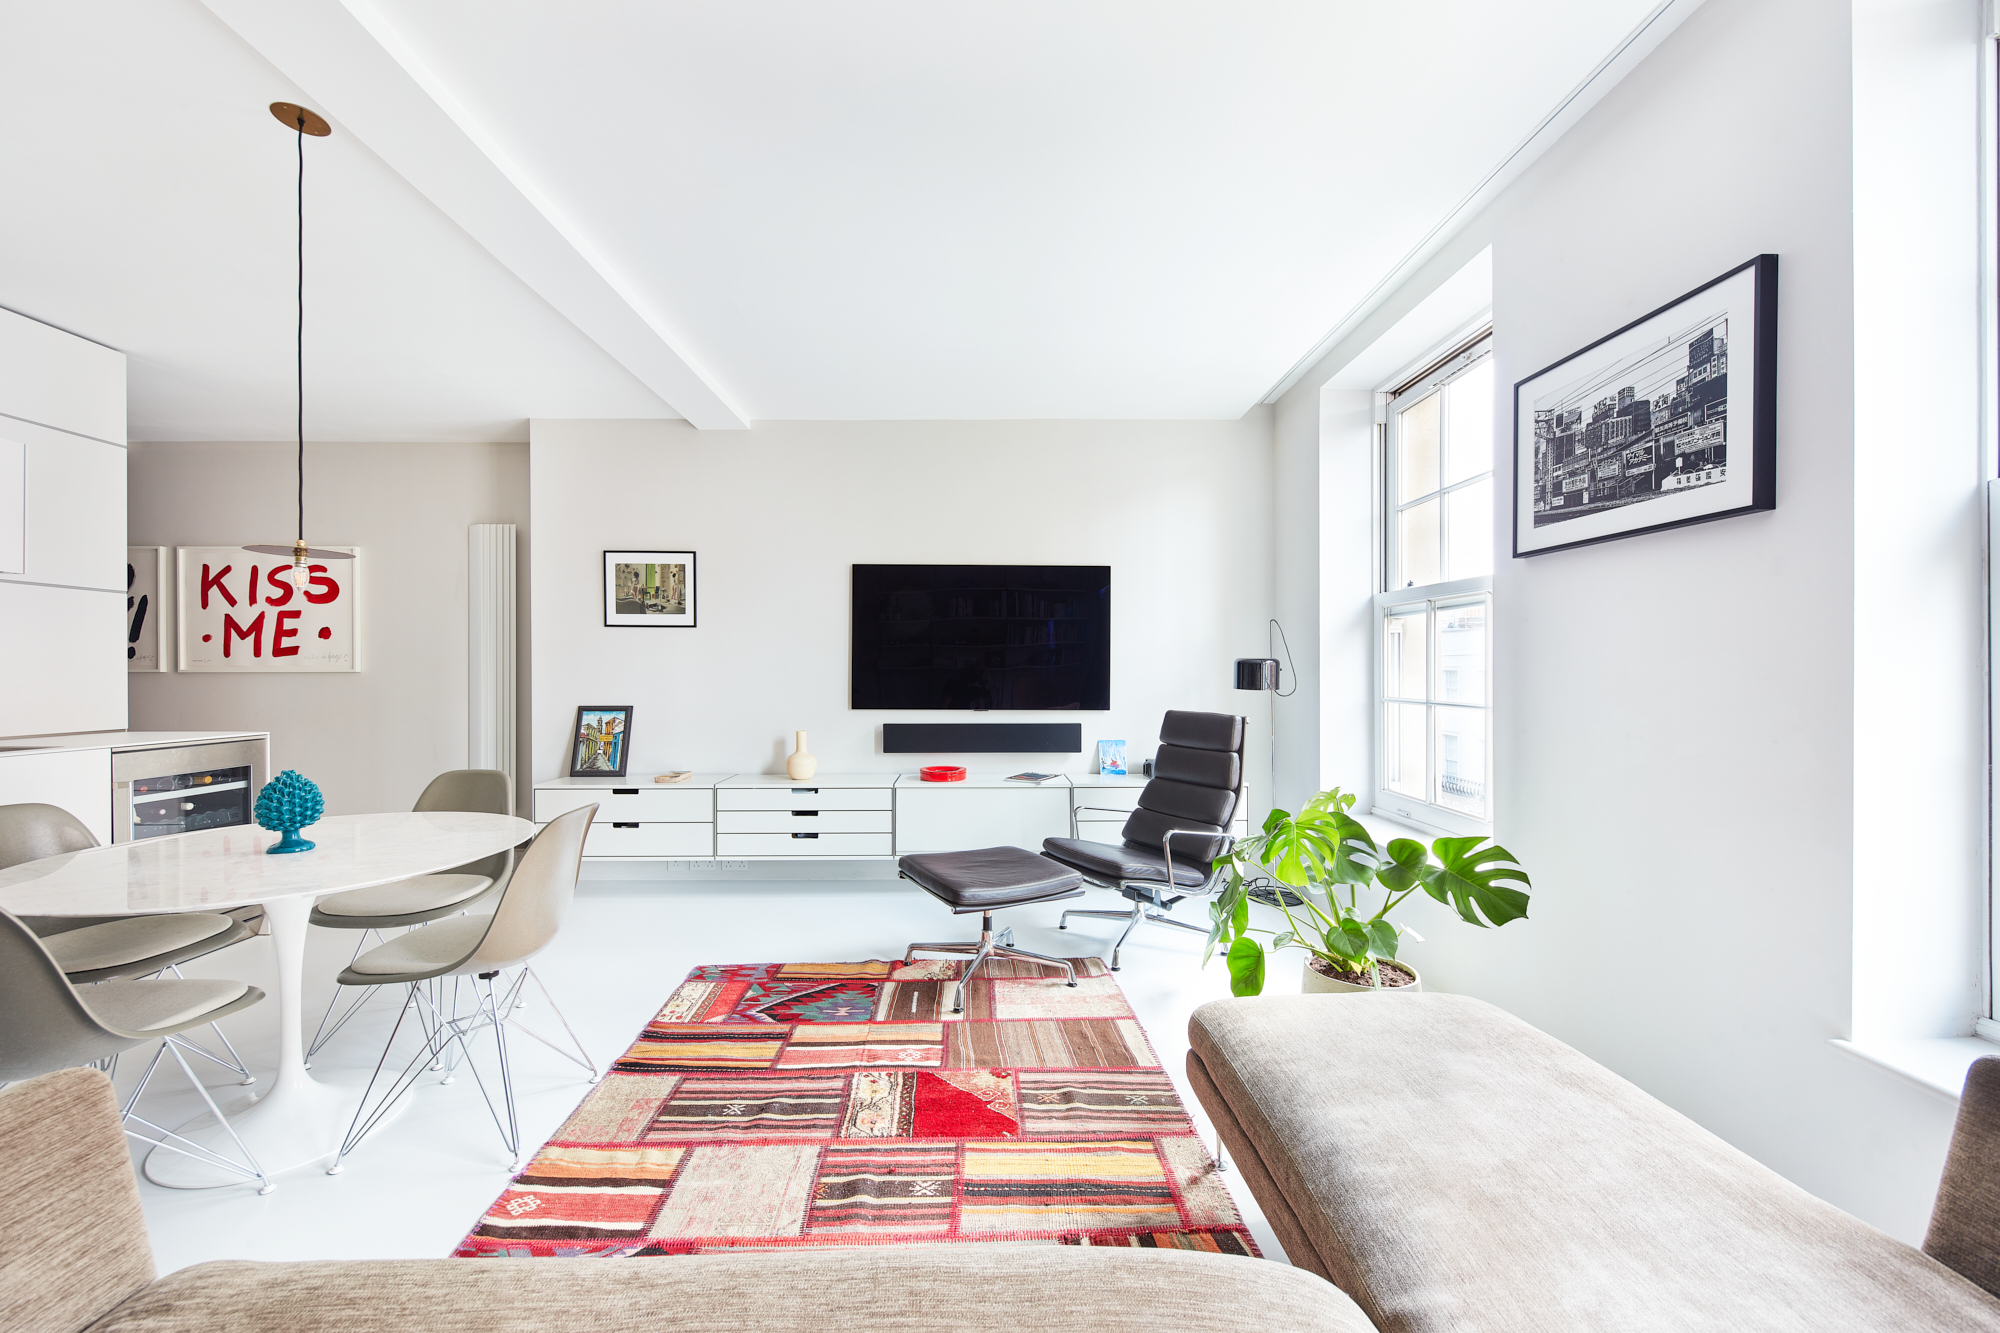 Luxury minimalist interior of an apartment for sale in Notting Hill